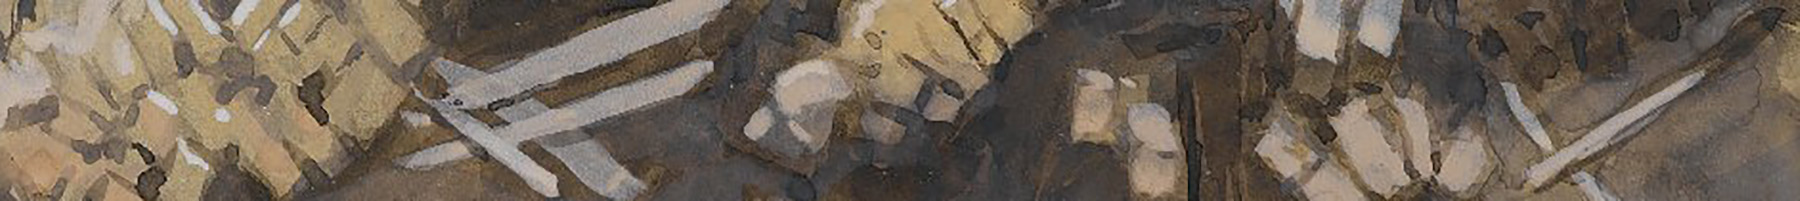 painting of rocks and wood planks